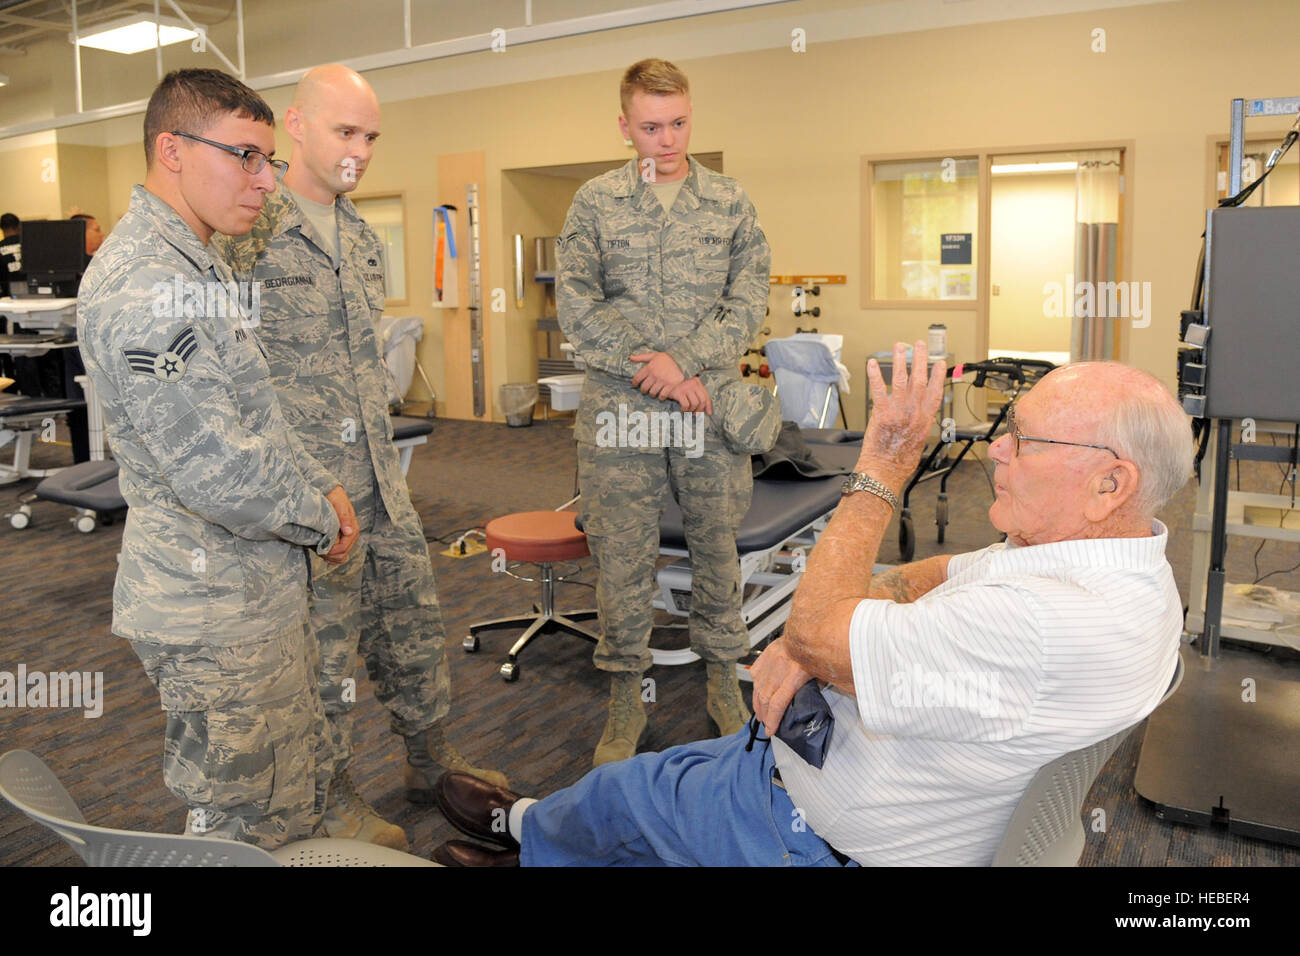 Senior Airman Pierce Ryan 729th Air Control Squadron, Tech. Sgt. Sterling Georgianna, 419th Fighter Wing, and Airman 1st Class Jerod Tipton 388th Fighter Wing, visit with Benjamine Winslow, a veteran at the George E. Wahlen Dept. of Veterans Affairs Medical Center, Salt Lake City, during a service project, Nov. 6, 2014. In honor of Veterans Day, active duty personnel from military bases around Utah, participated side-by-side with NBA players from the Utah Jazz basketball team, in several service projects at the VA Medical Center, Salt Lake City, Utah. (U.S. Air Force photo by Todd Cromar/Relea Stock Photo